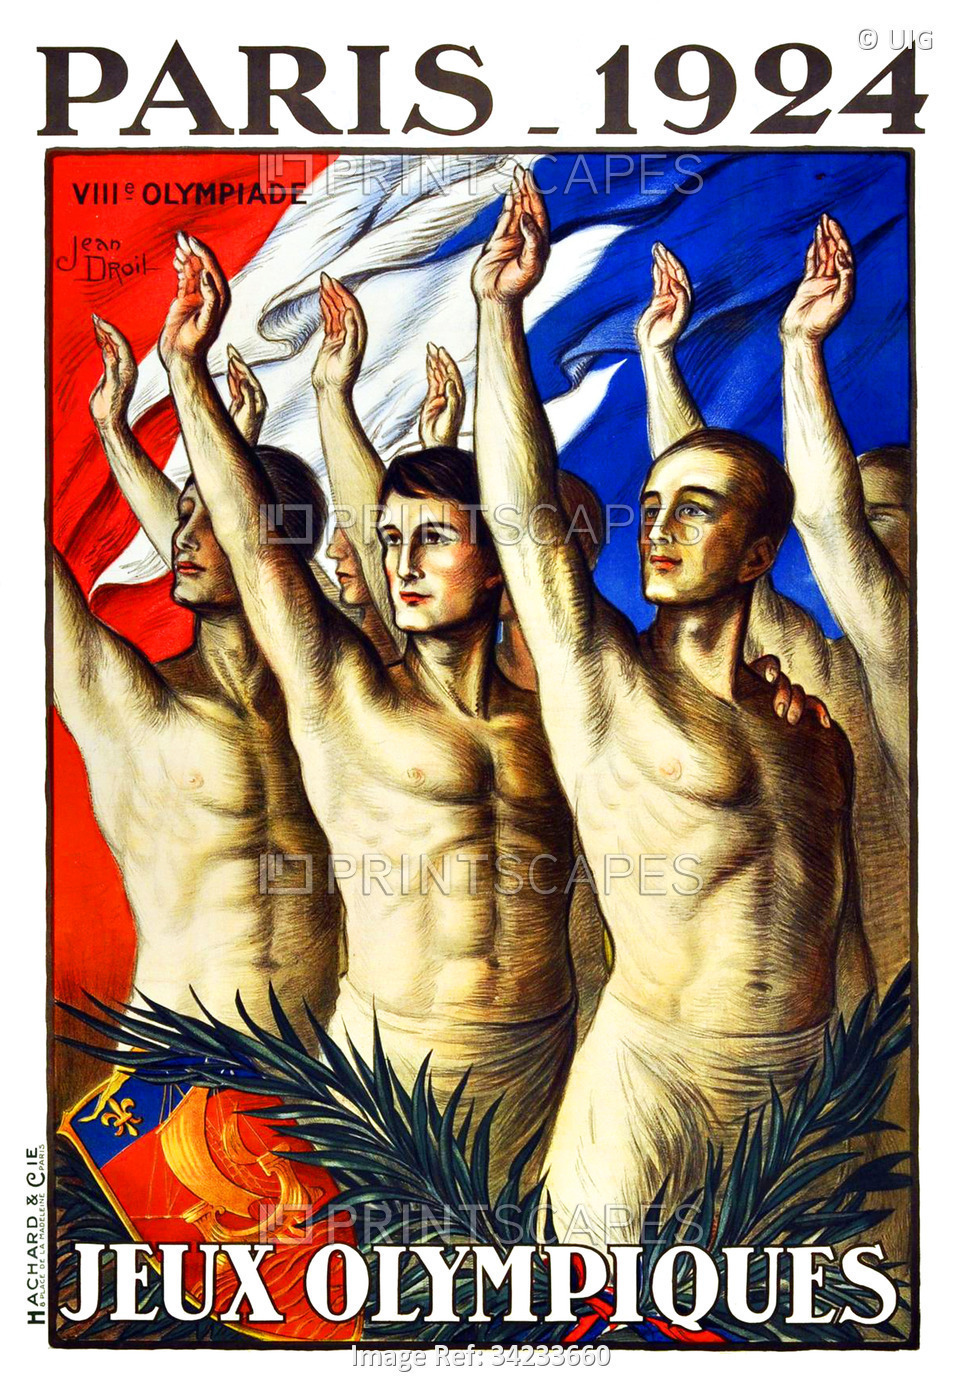 France: Poster advertising the Paris 1924 Olympic Games / Jeux Olympiques, Jean Droit (1884-1961), 1